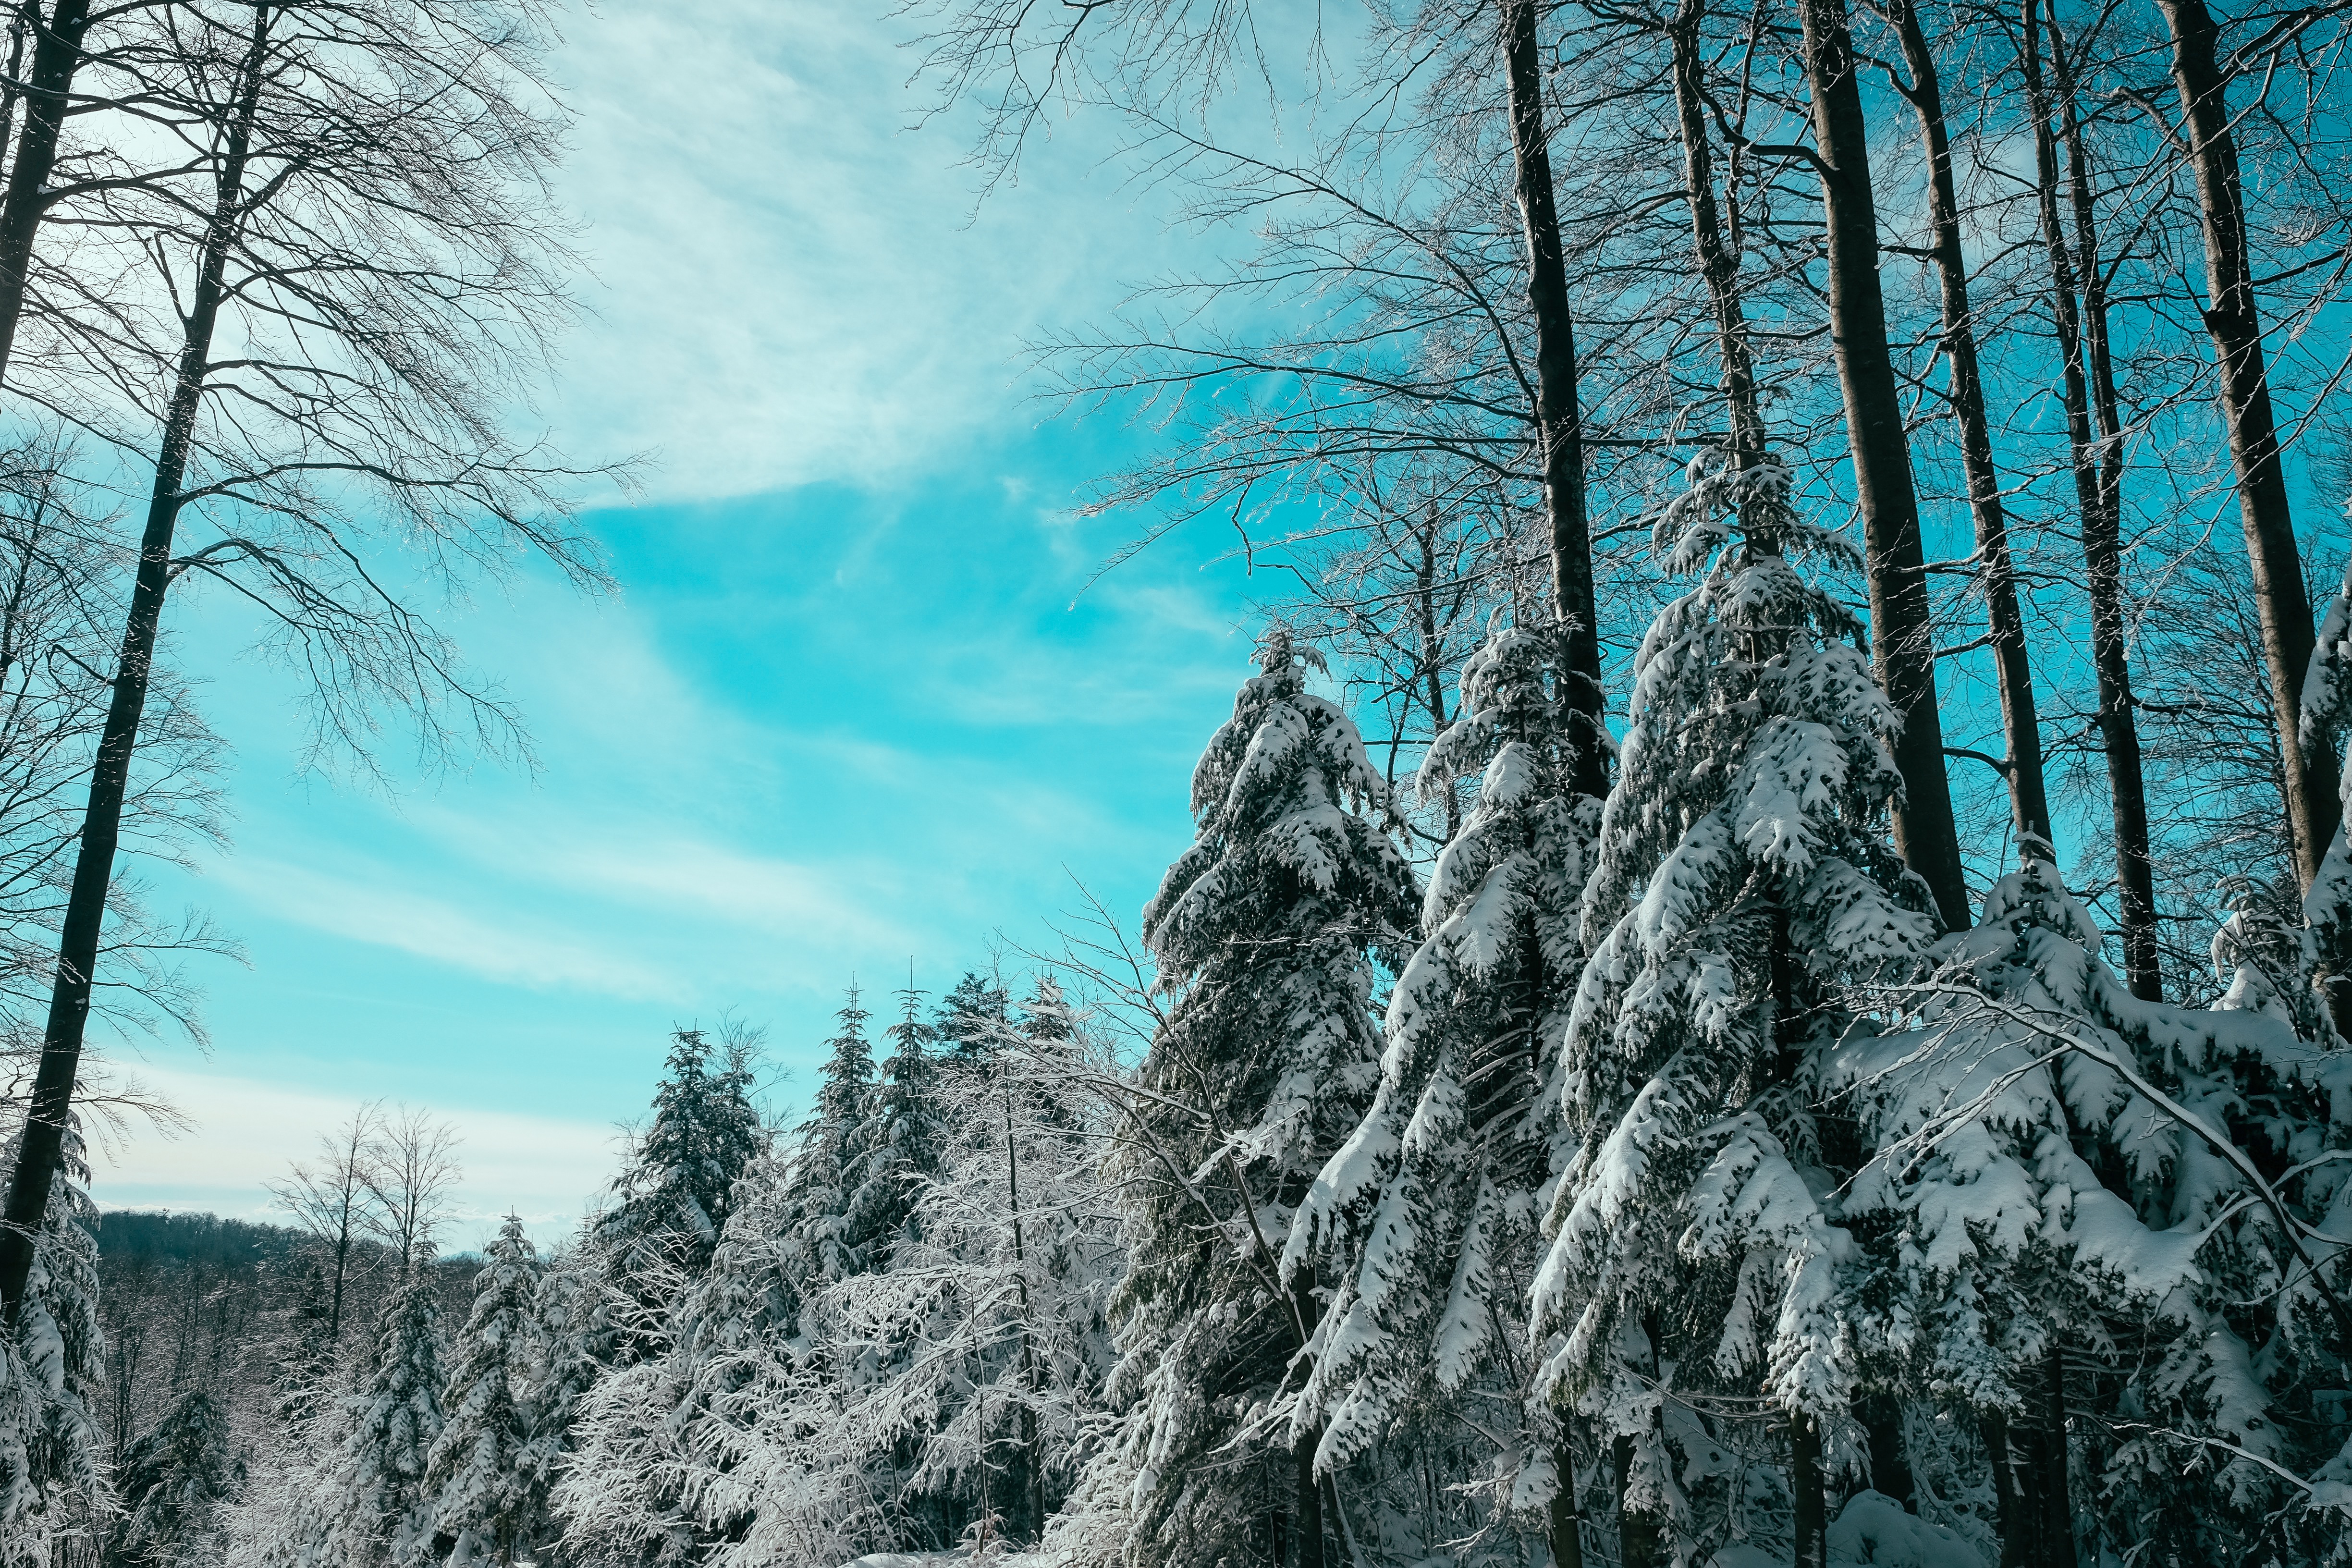 69639 download wallpaper winter, nature, sky, forest, ate screensavers and pictures for free